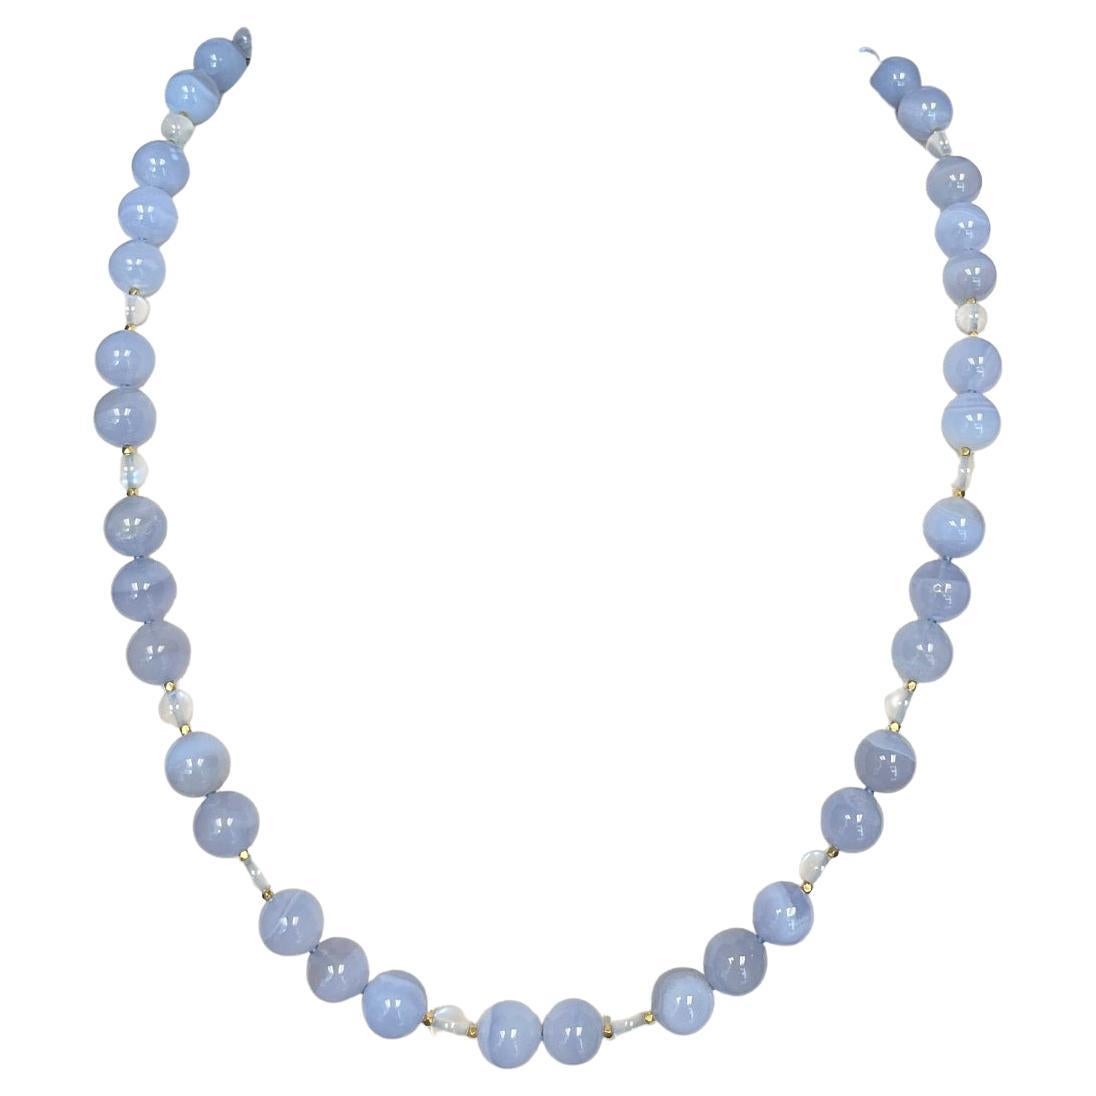 10mm Chalcedony and Moonstone Bead Necklace with Yellow Gold Accents